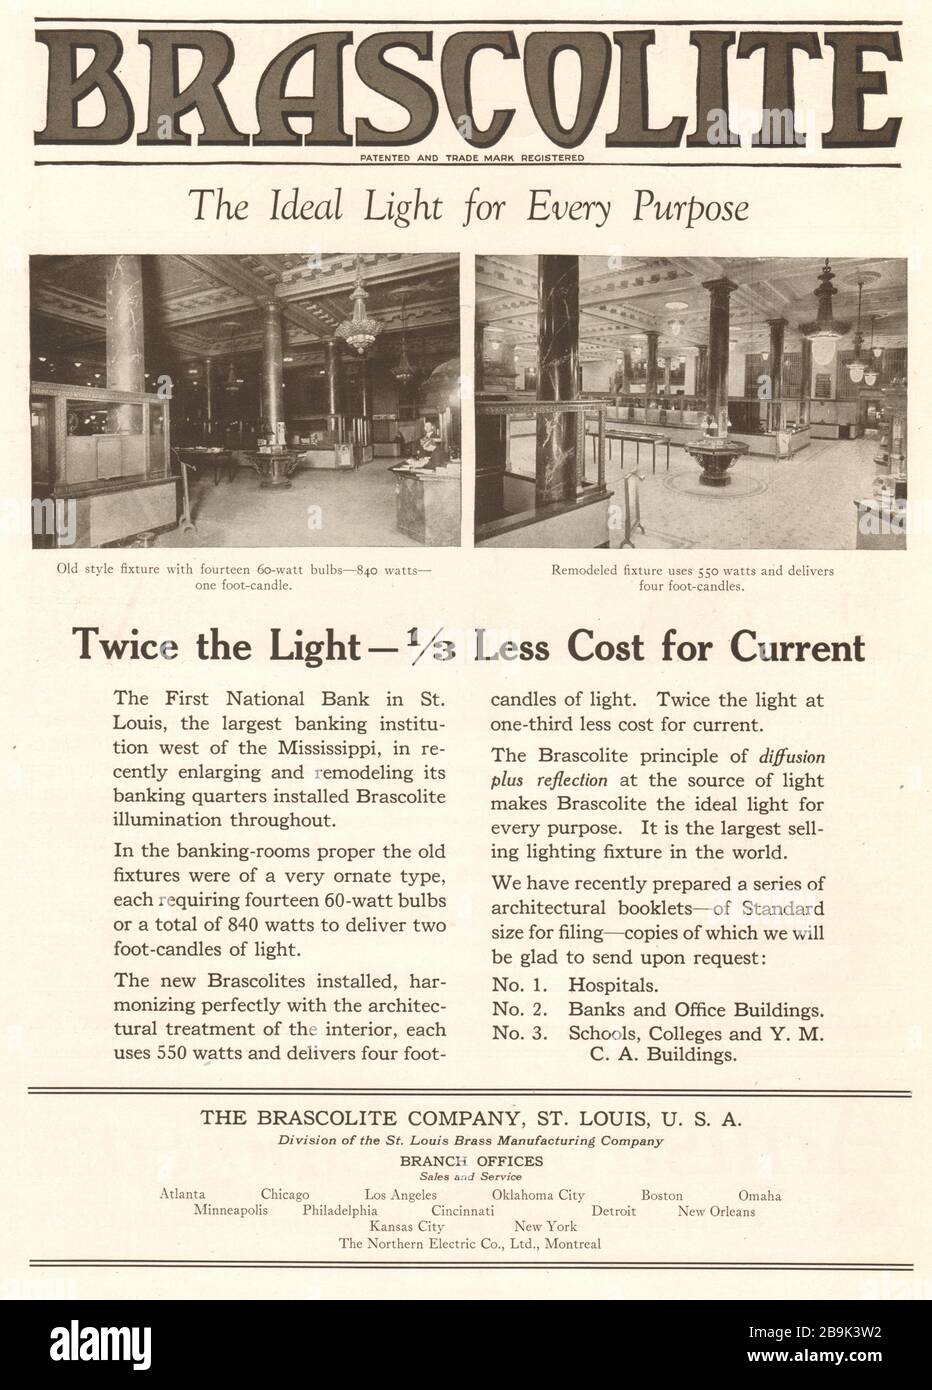 Brascolite. The ideal light for every purpose. Twice the light- 1/3 less cost for current. The Brascolite Company, St. Louis, Missouri, U.S.A (1922) Stock Photo